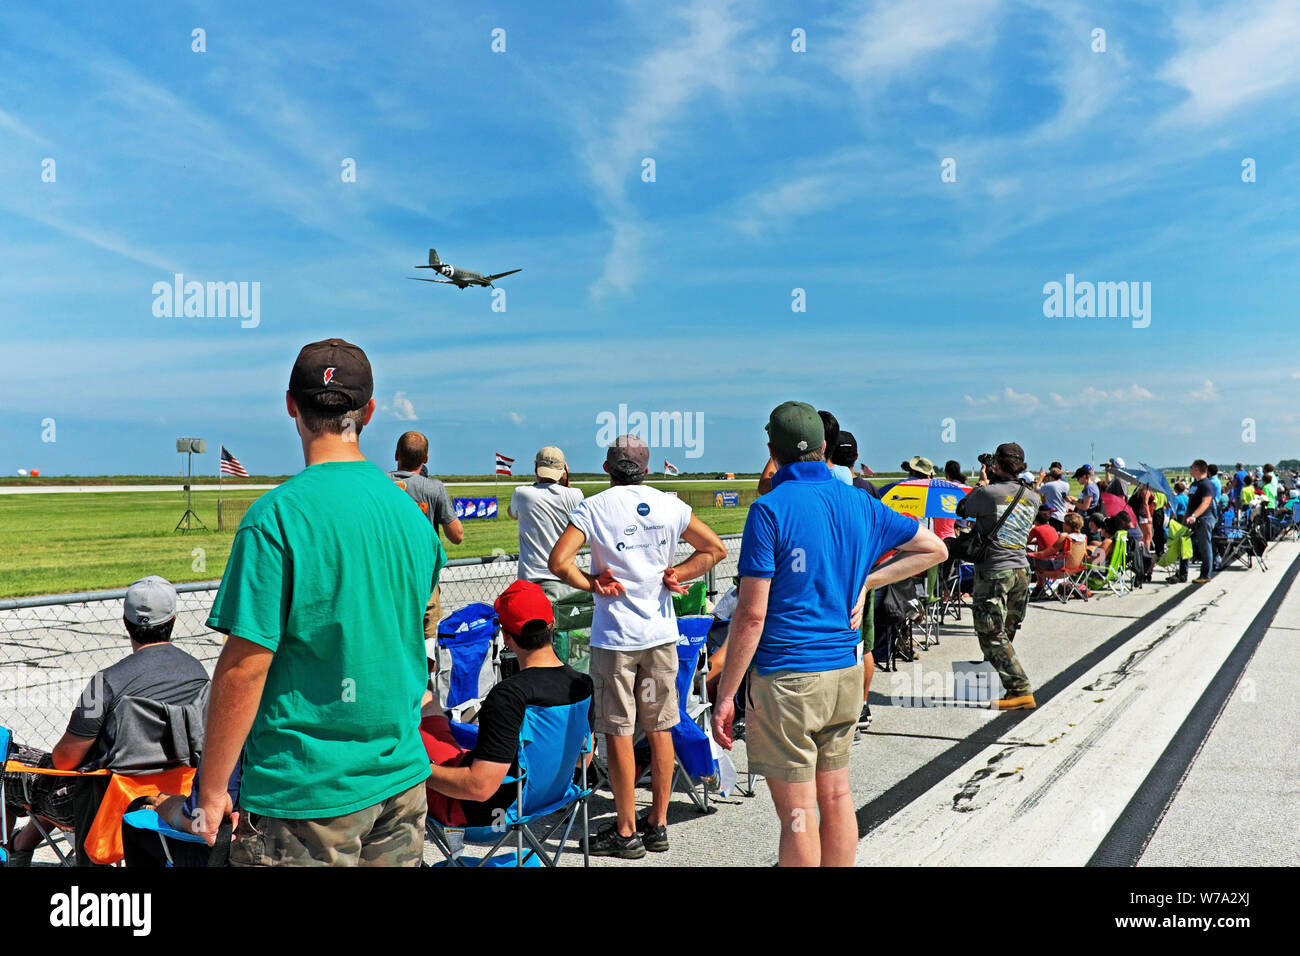 Spectators watch a performance at the 2108 Cleveland National Air Show at Burke Lakefront Airport in downtown Cleveland, Ohio, USA. Stock Photo